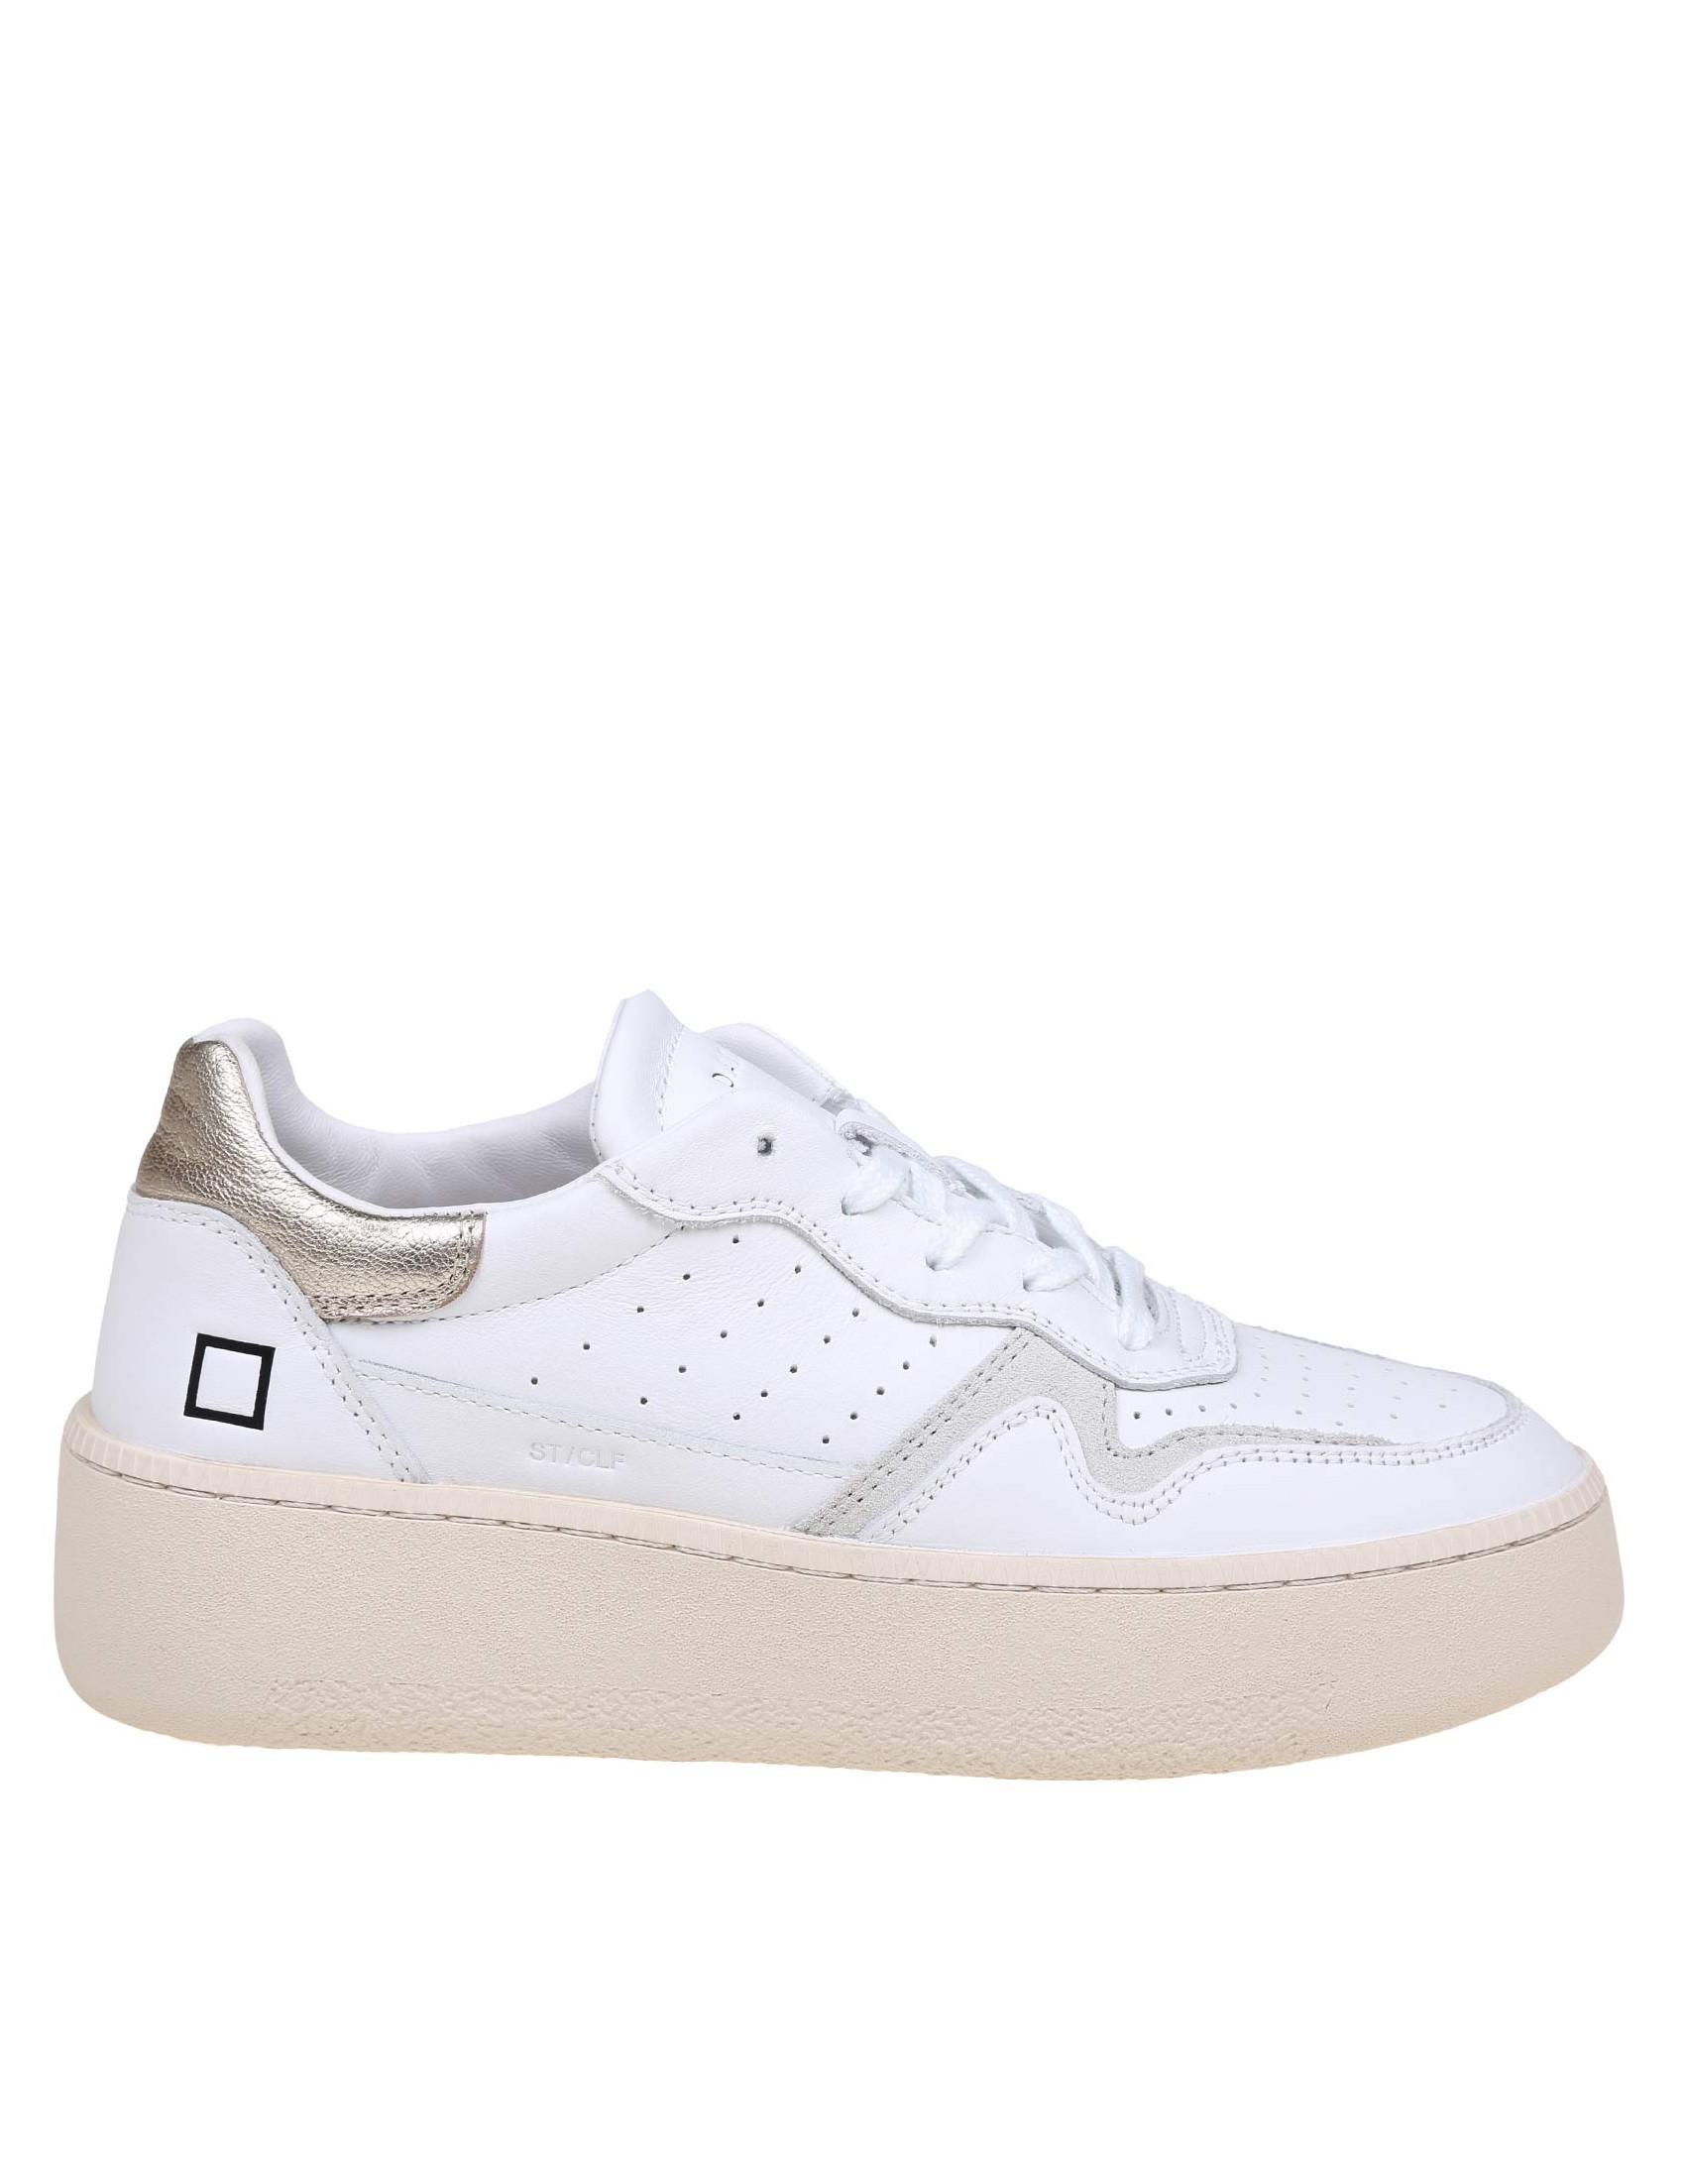 D.A.T.E.  STEP SNEAKERS IN WHITE LEATHER